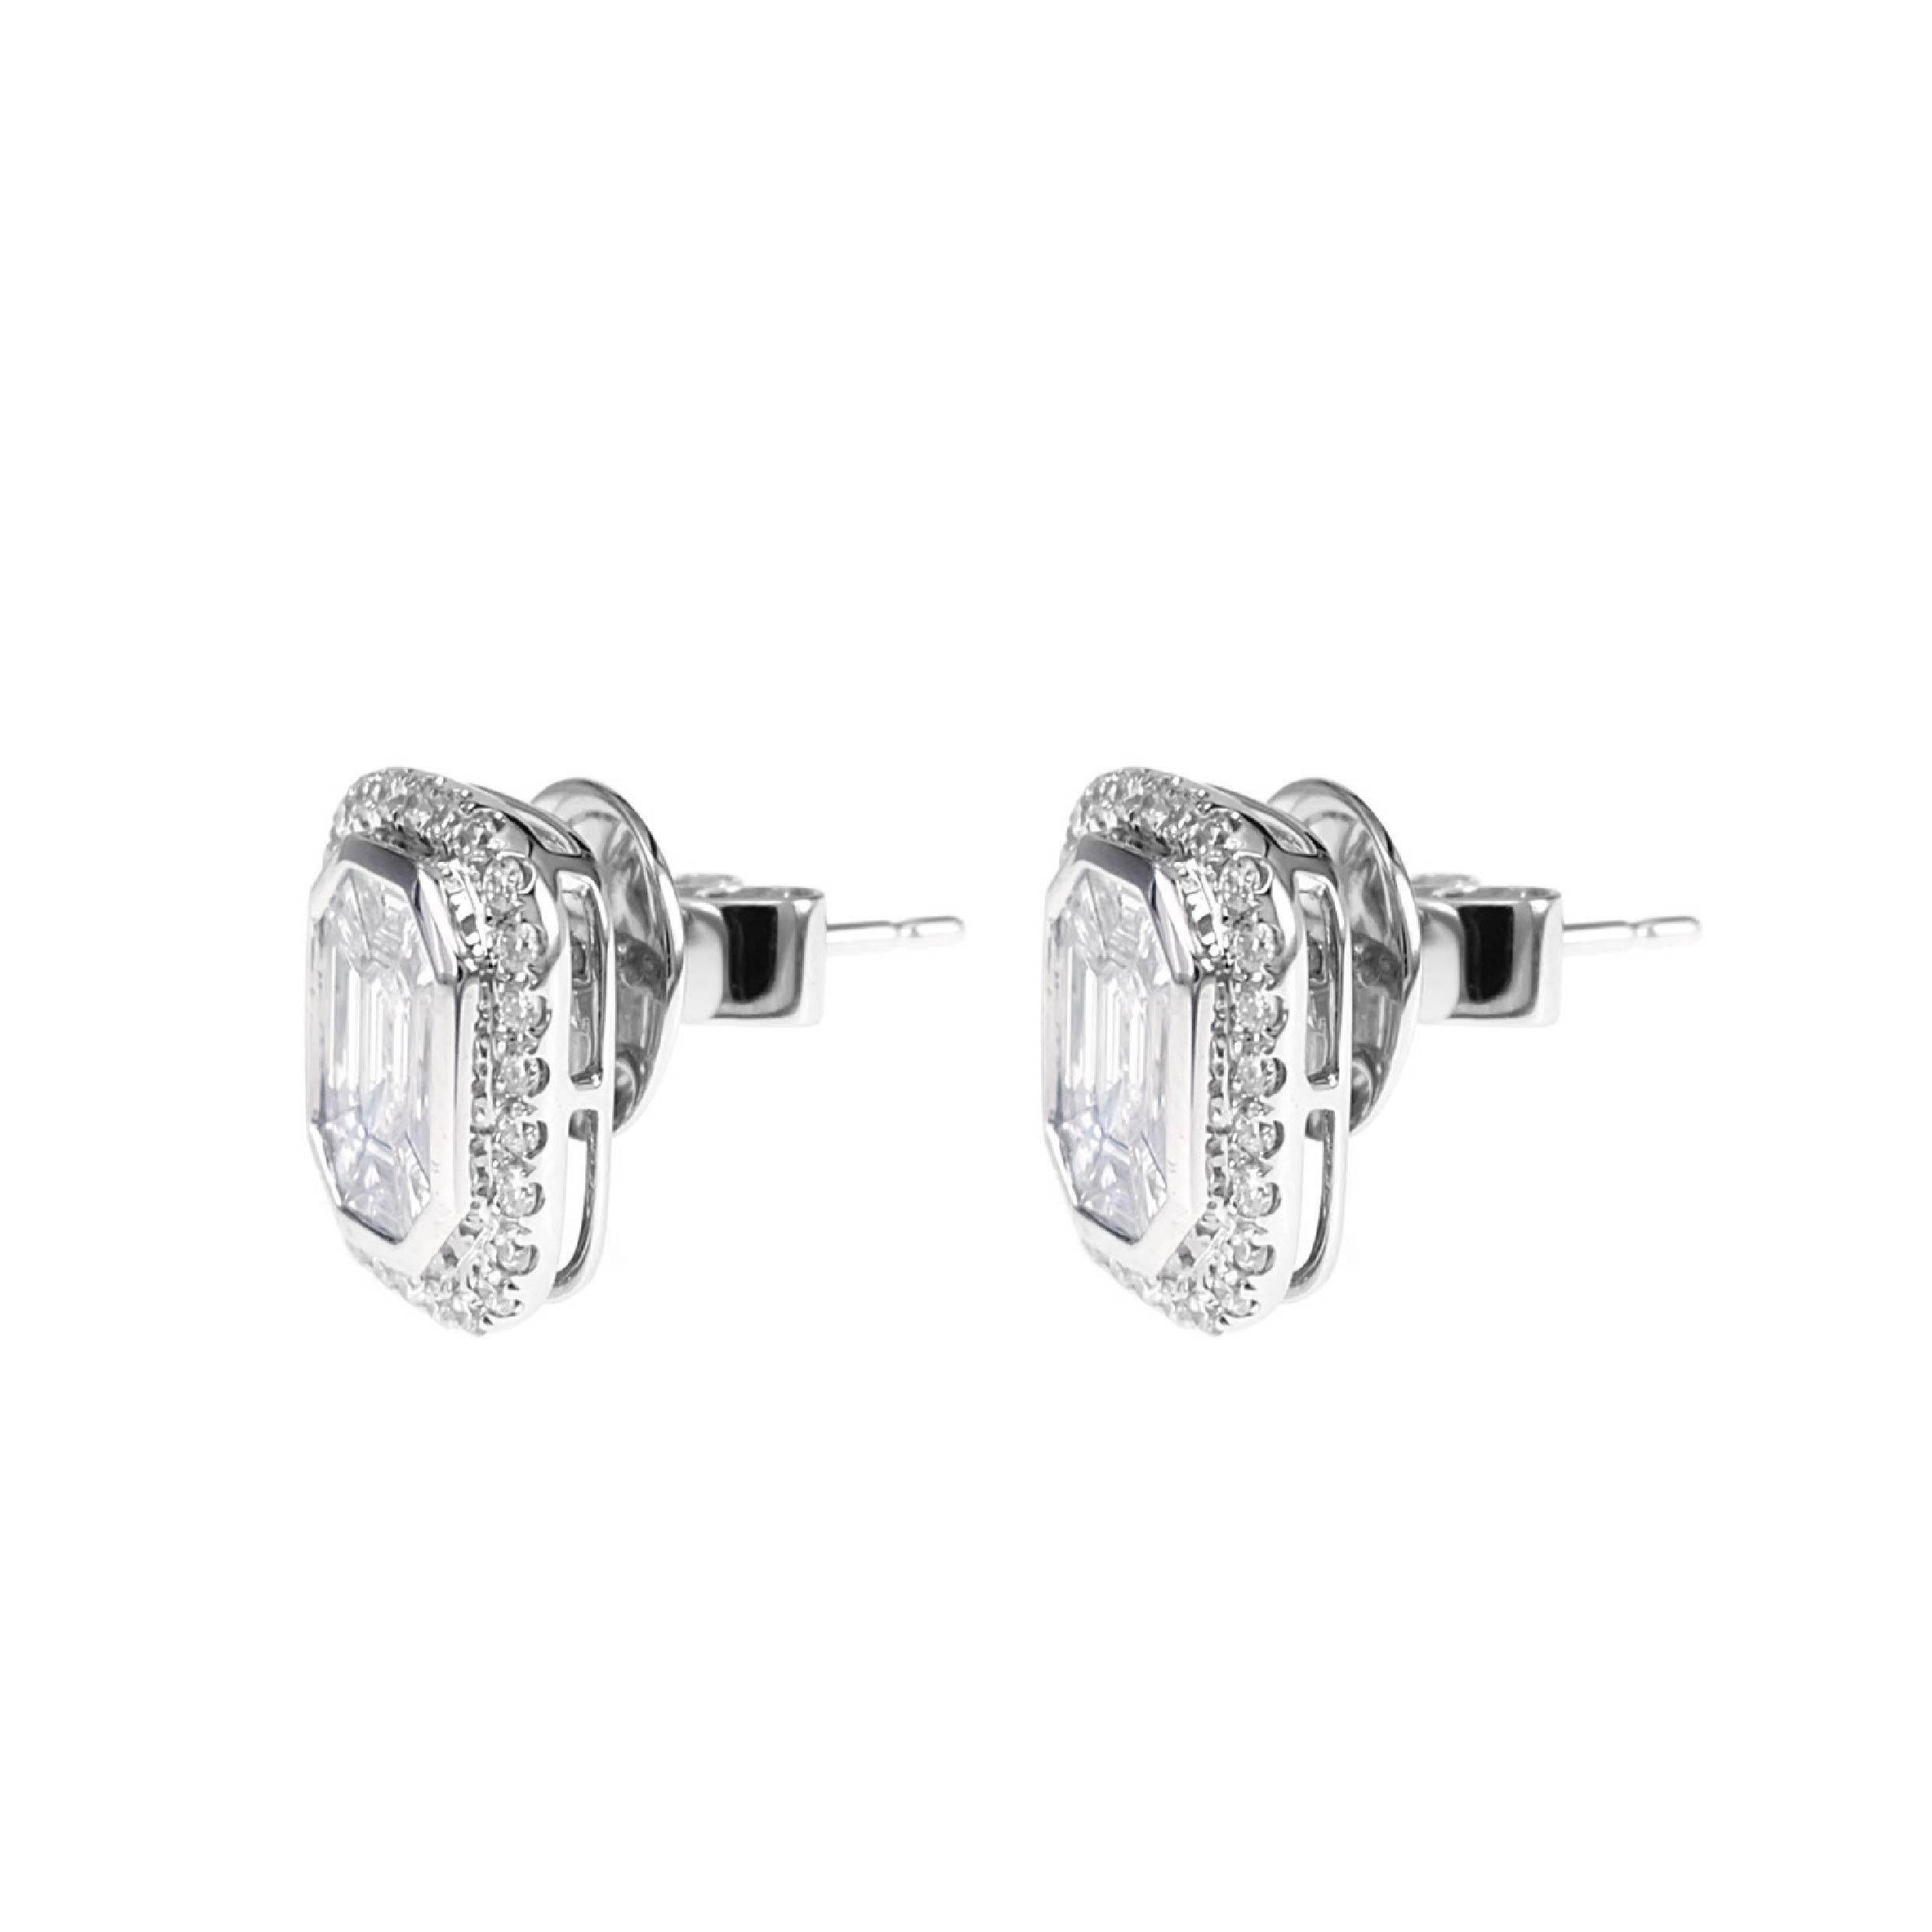 Using the state of art technique , 9 pieces of diamonds are combined in a way to give an outlook of 2 carat Emerald cut. In the earring , we have used specially cut 18 pieces to give you a 2 carat Emerald cut outlook which does not hurt your wallet.